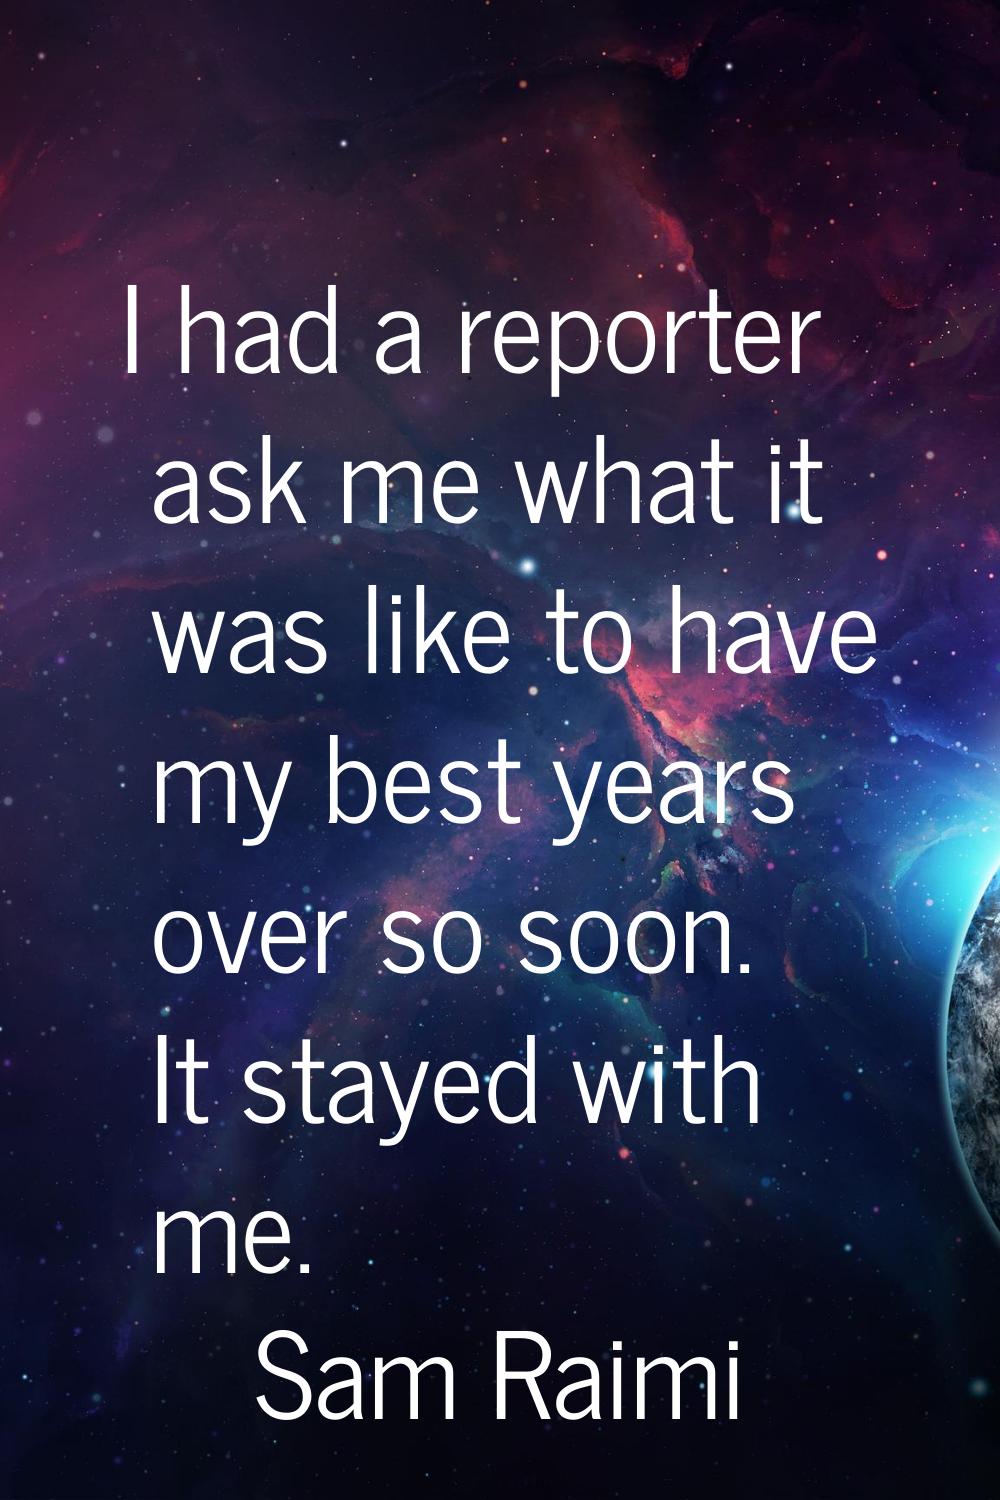 I had a reporter ask me what it was like to have my best years over so soon. It stayed with me.